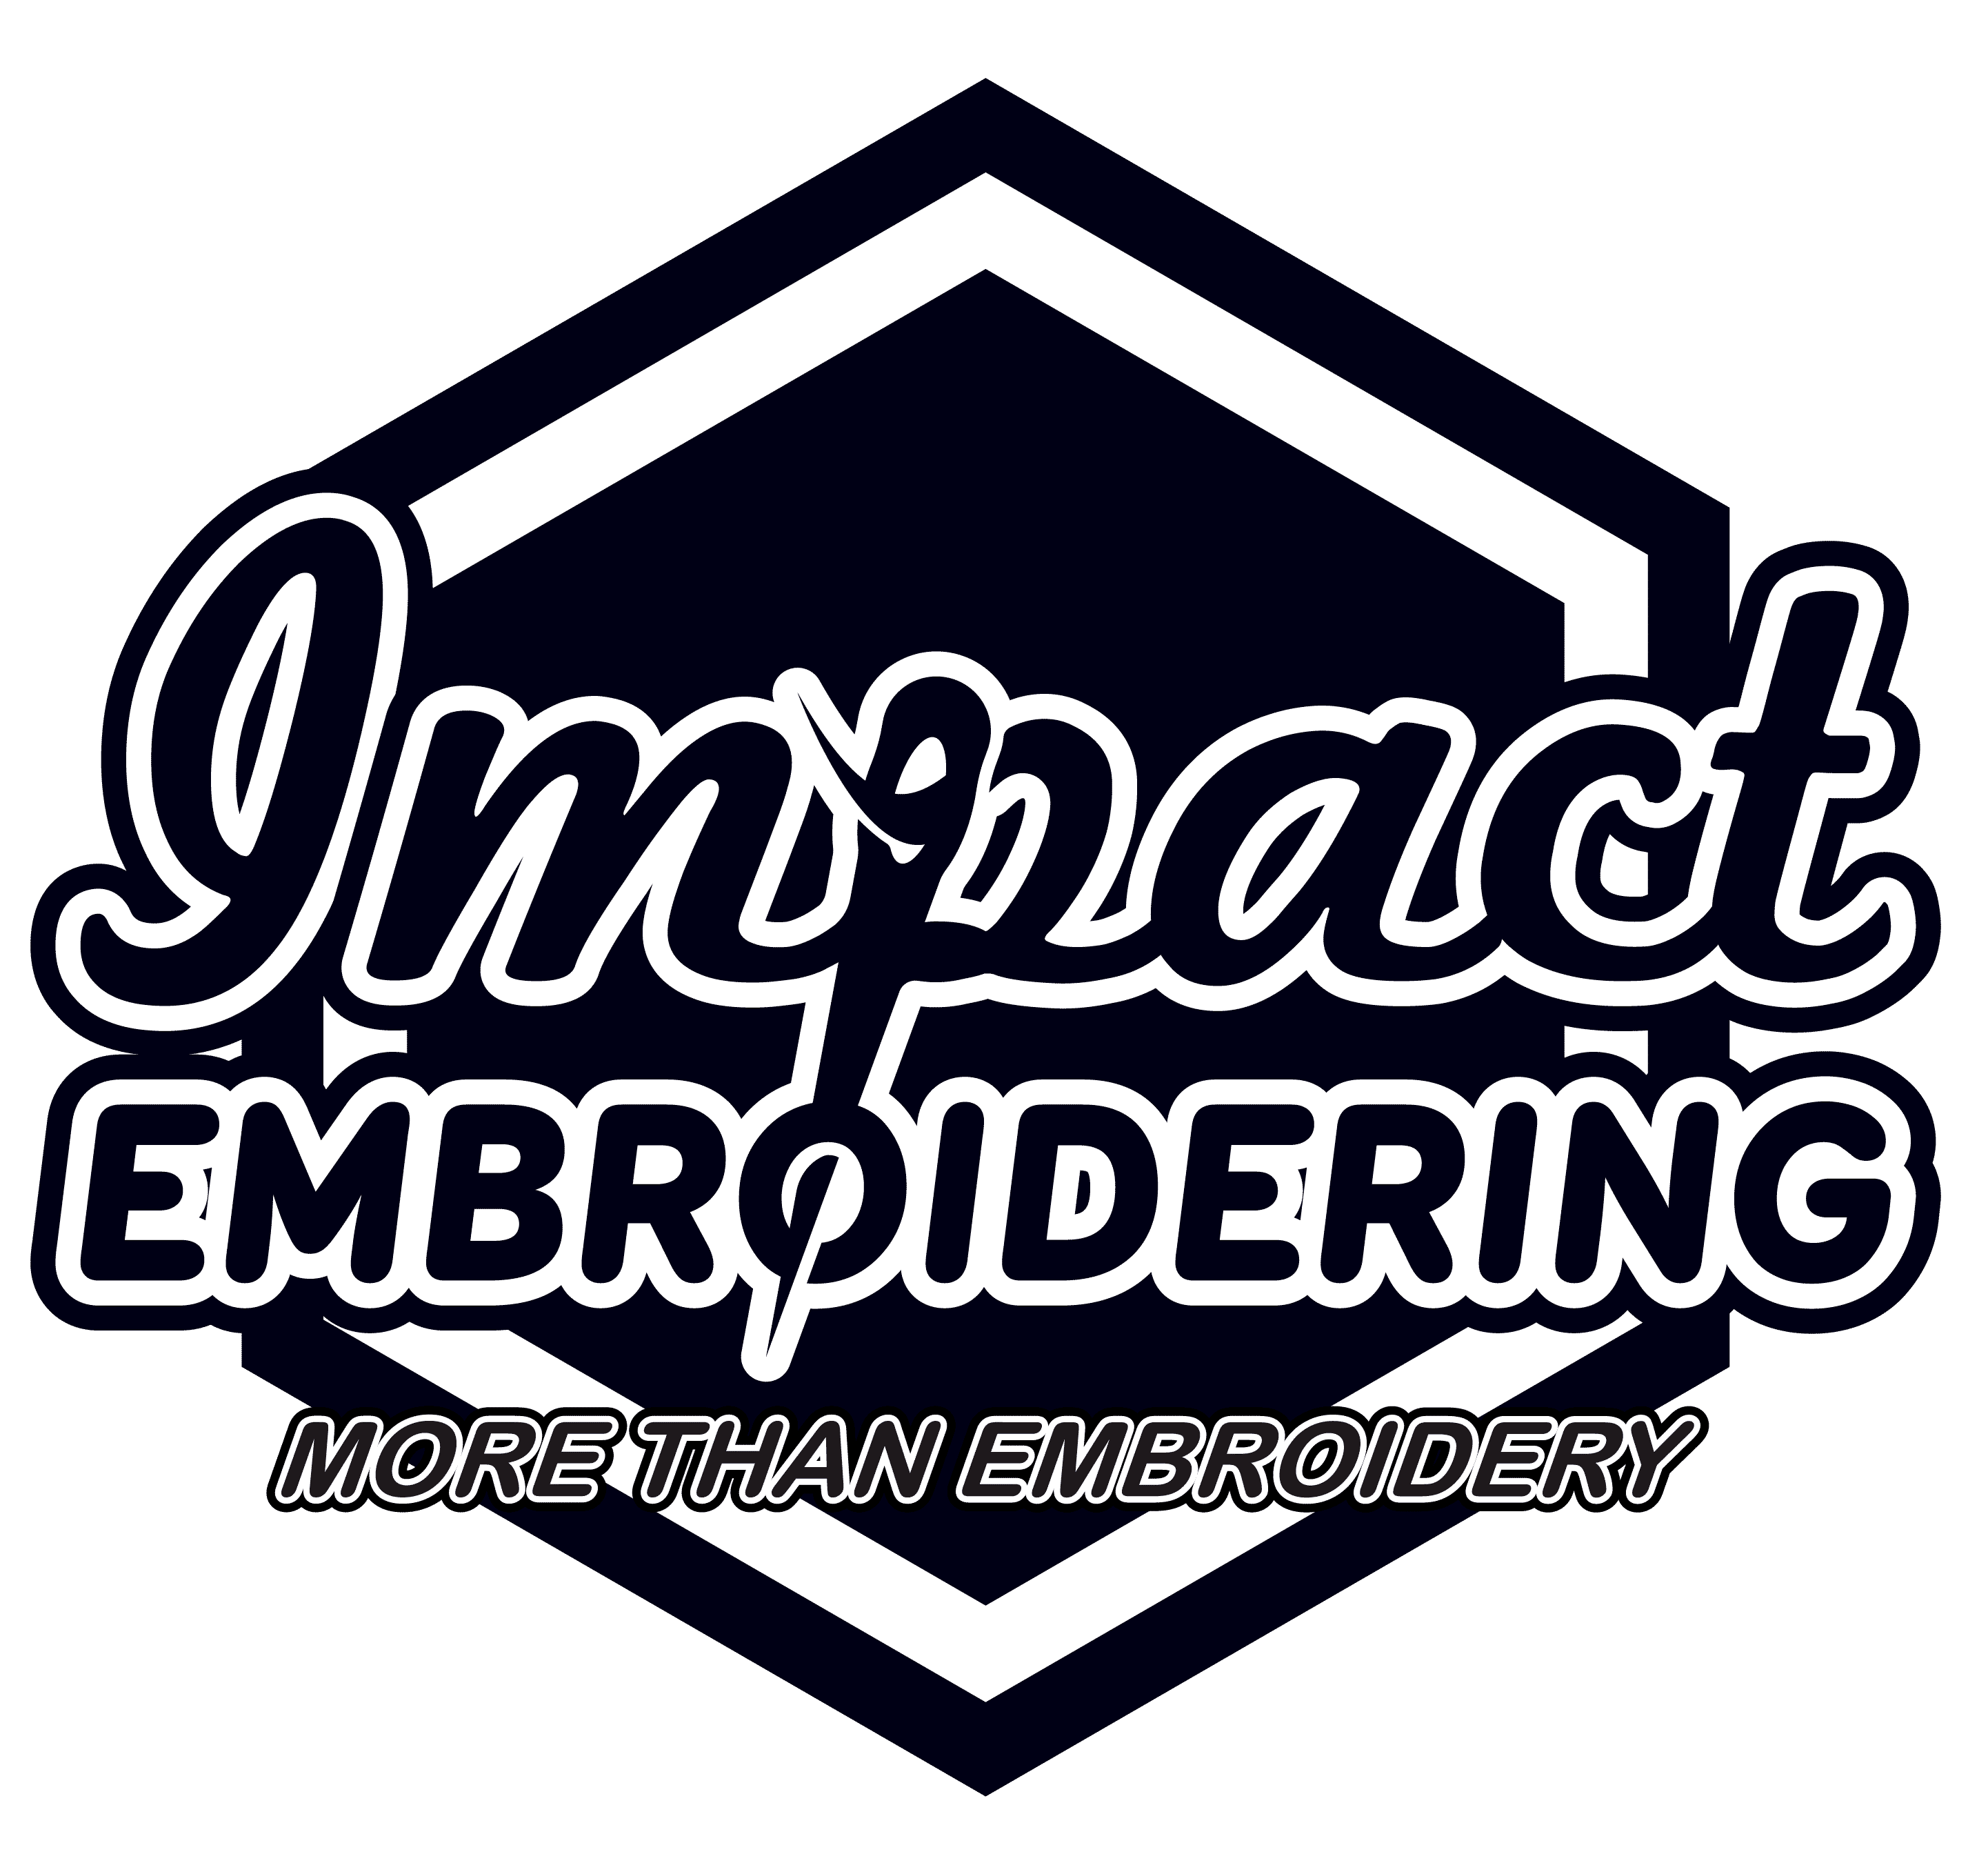 Impact Embroidering Victoria Clothing and Apparel Manufacturer logo